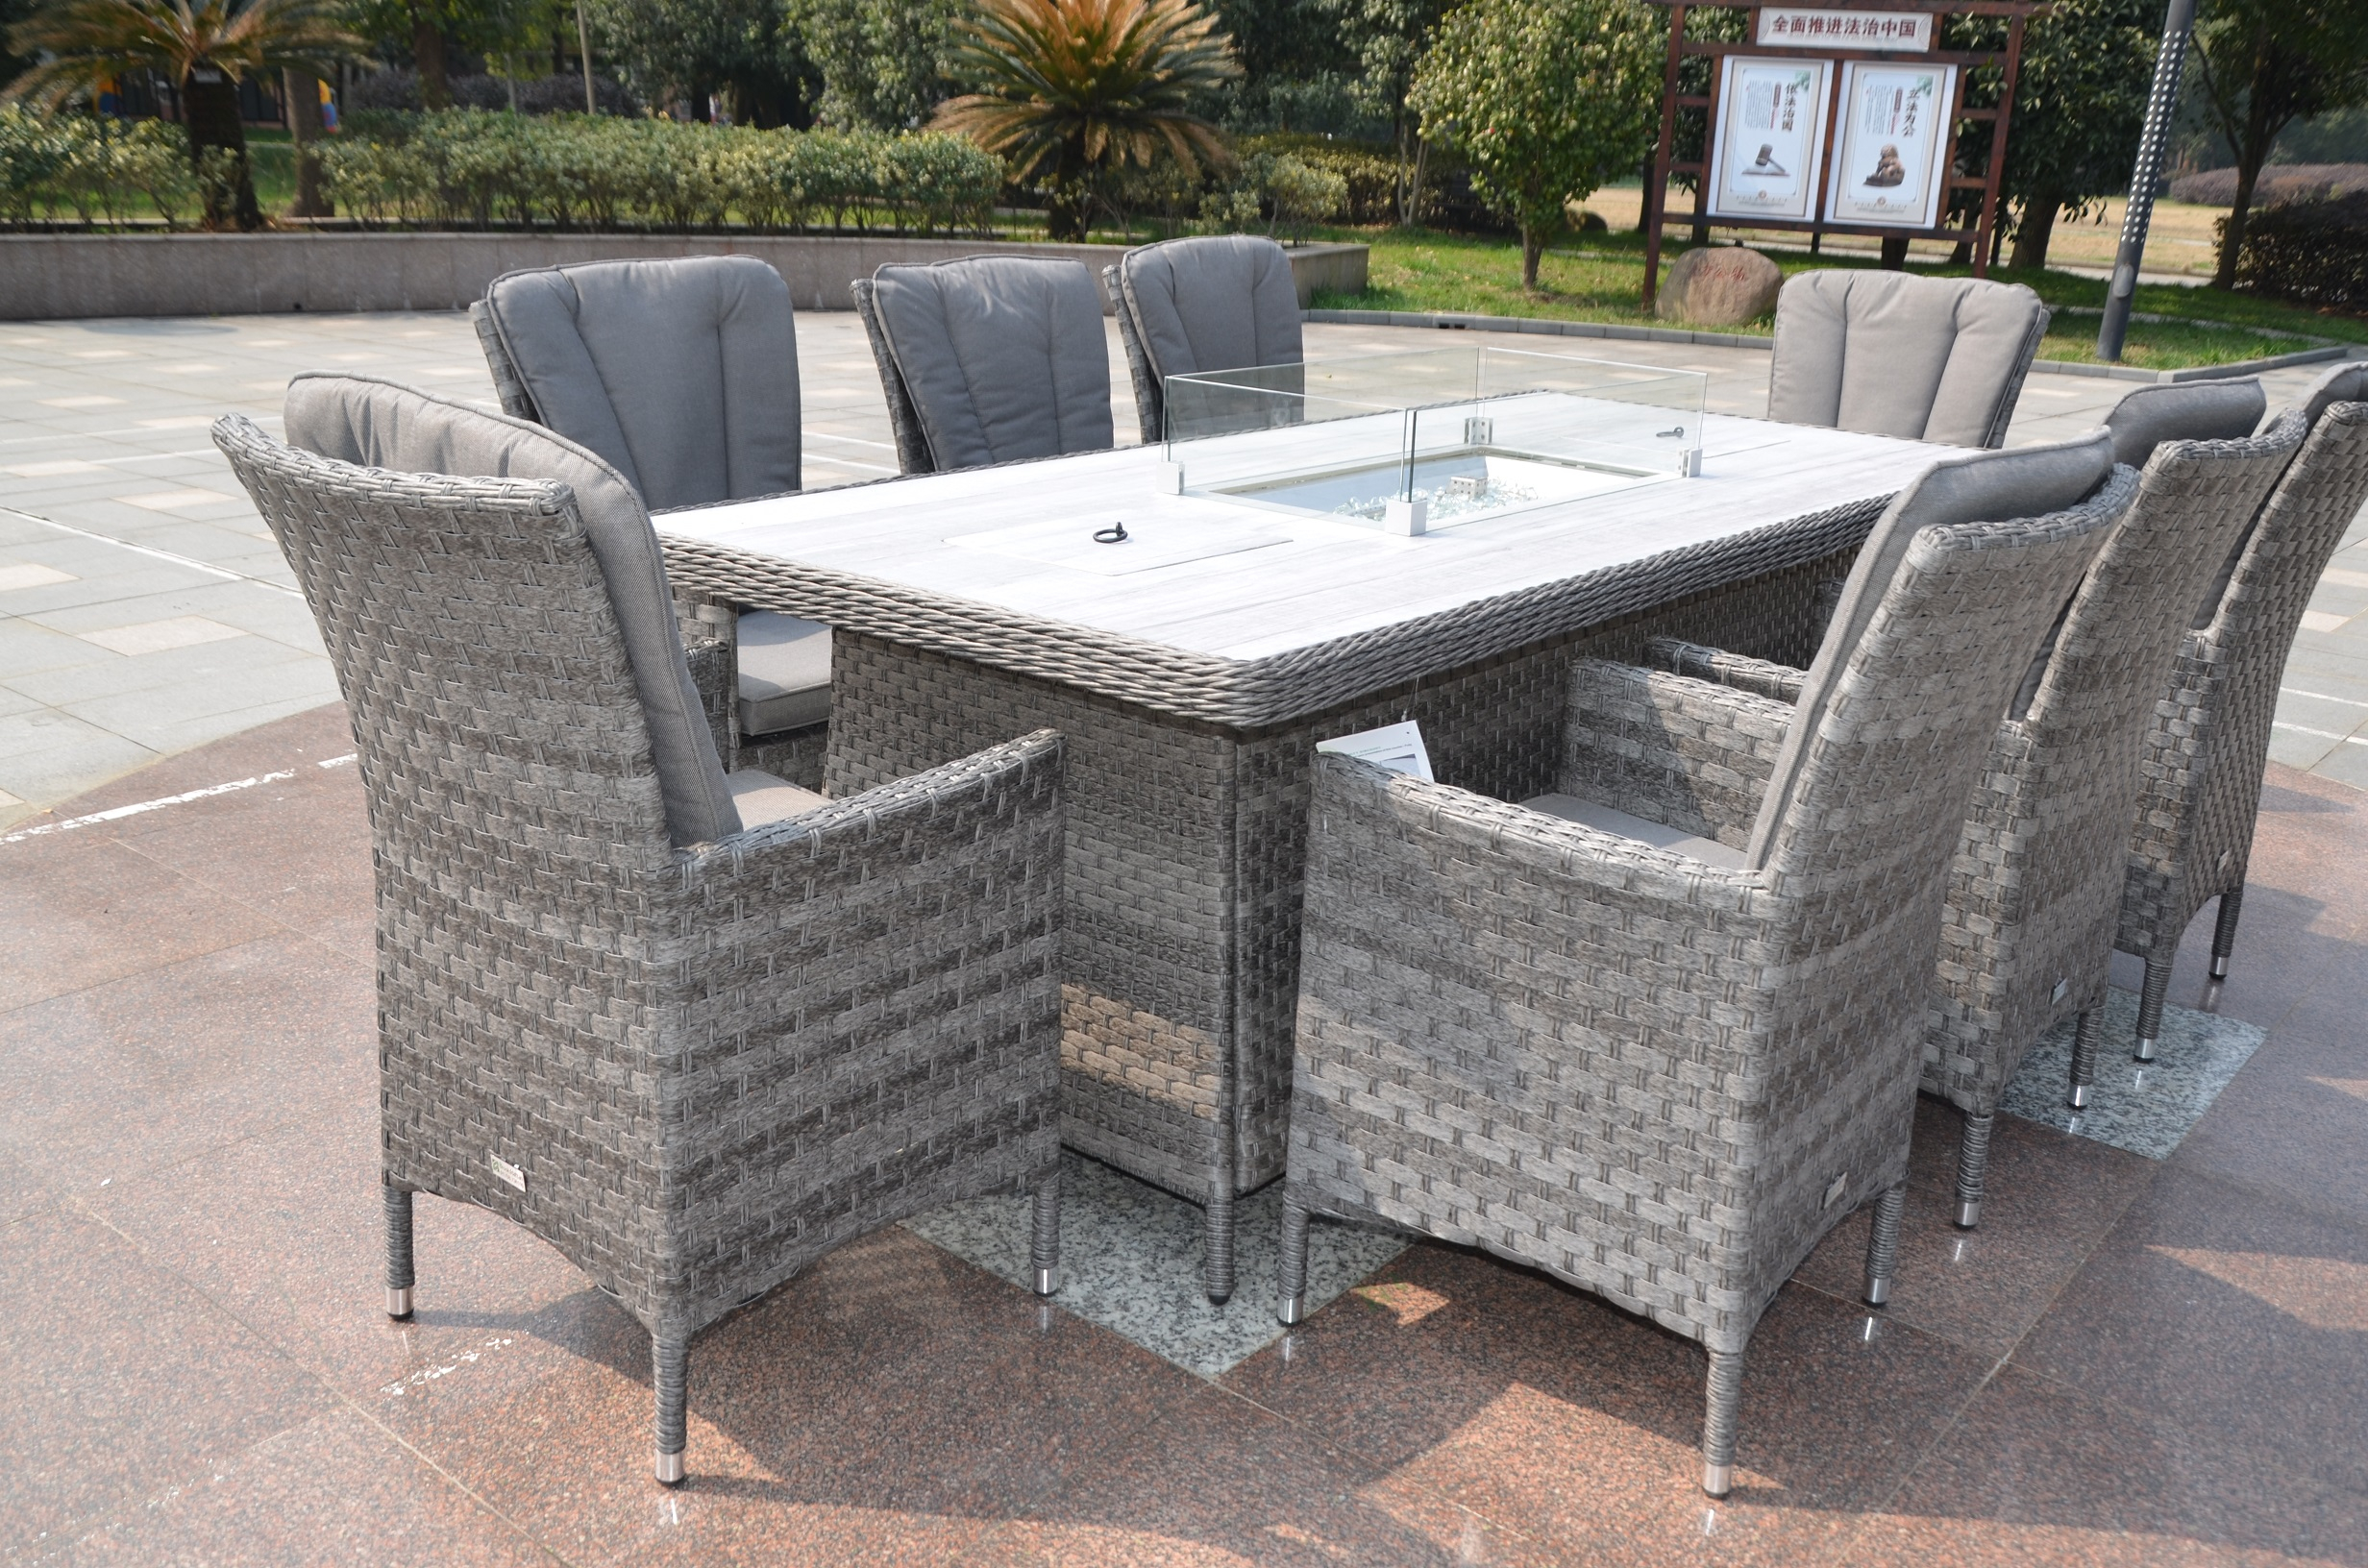 Rattan Garden Furniture Dining Sets Best Quality Rattan intended for size 2464 X 1632